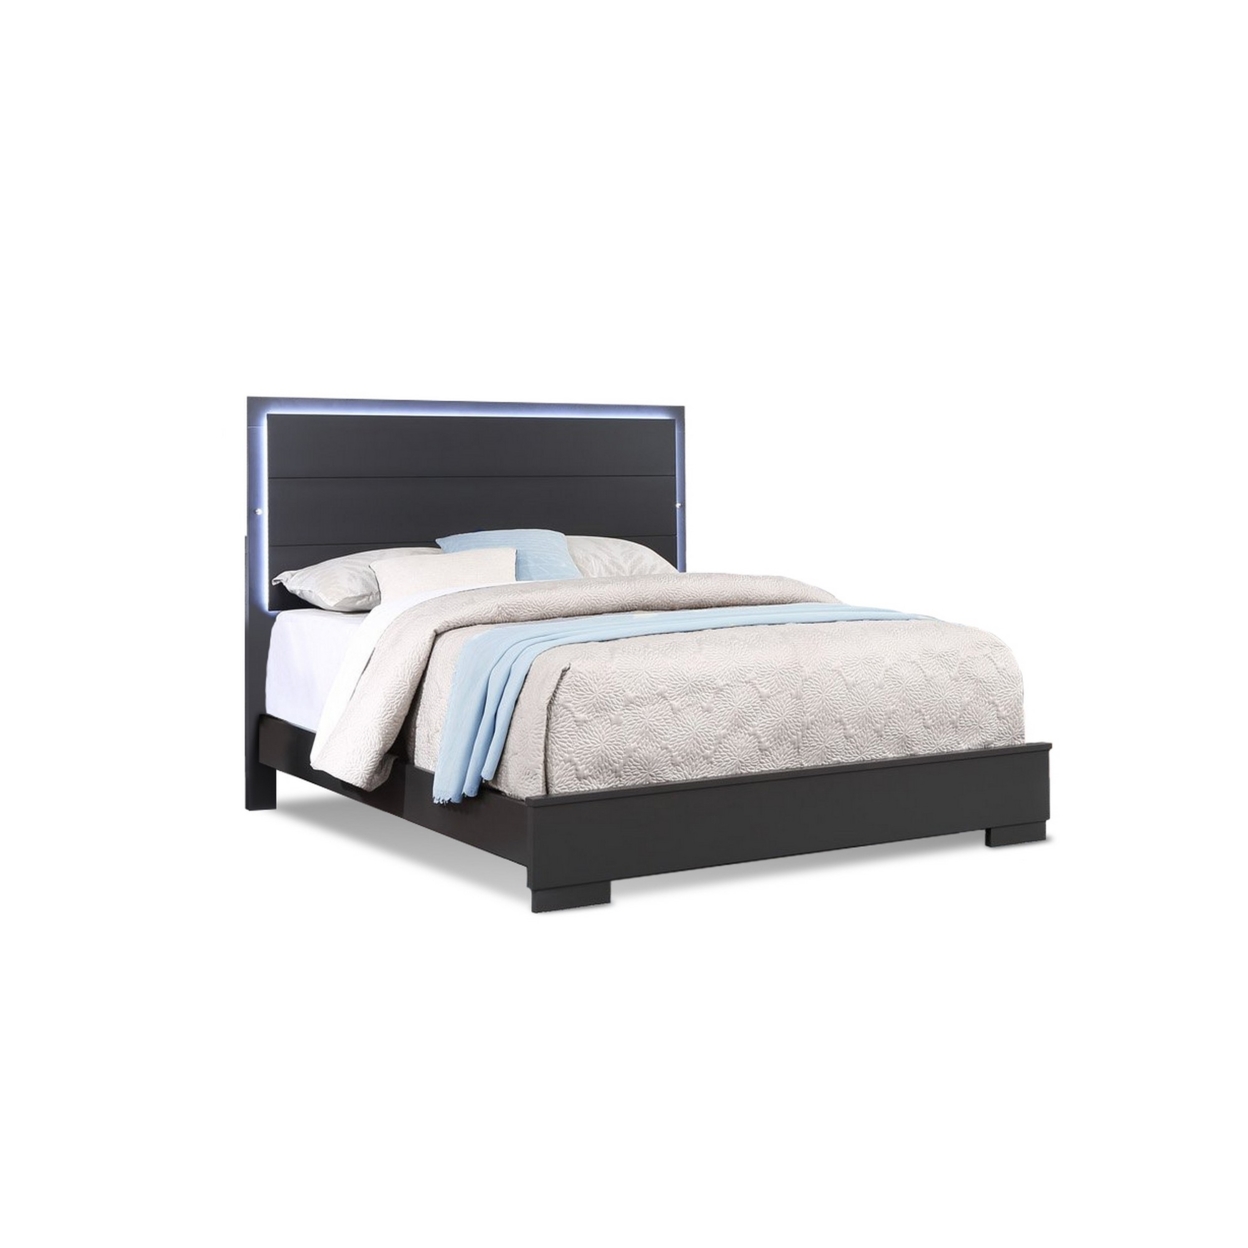 Vin Modern Queen Sized Bed, Panel Headboard, LED Light, Charcoal Gray